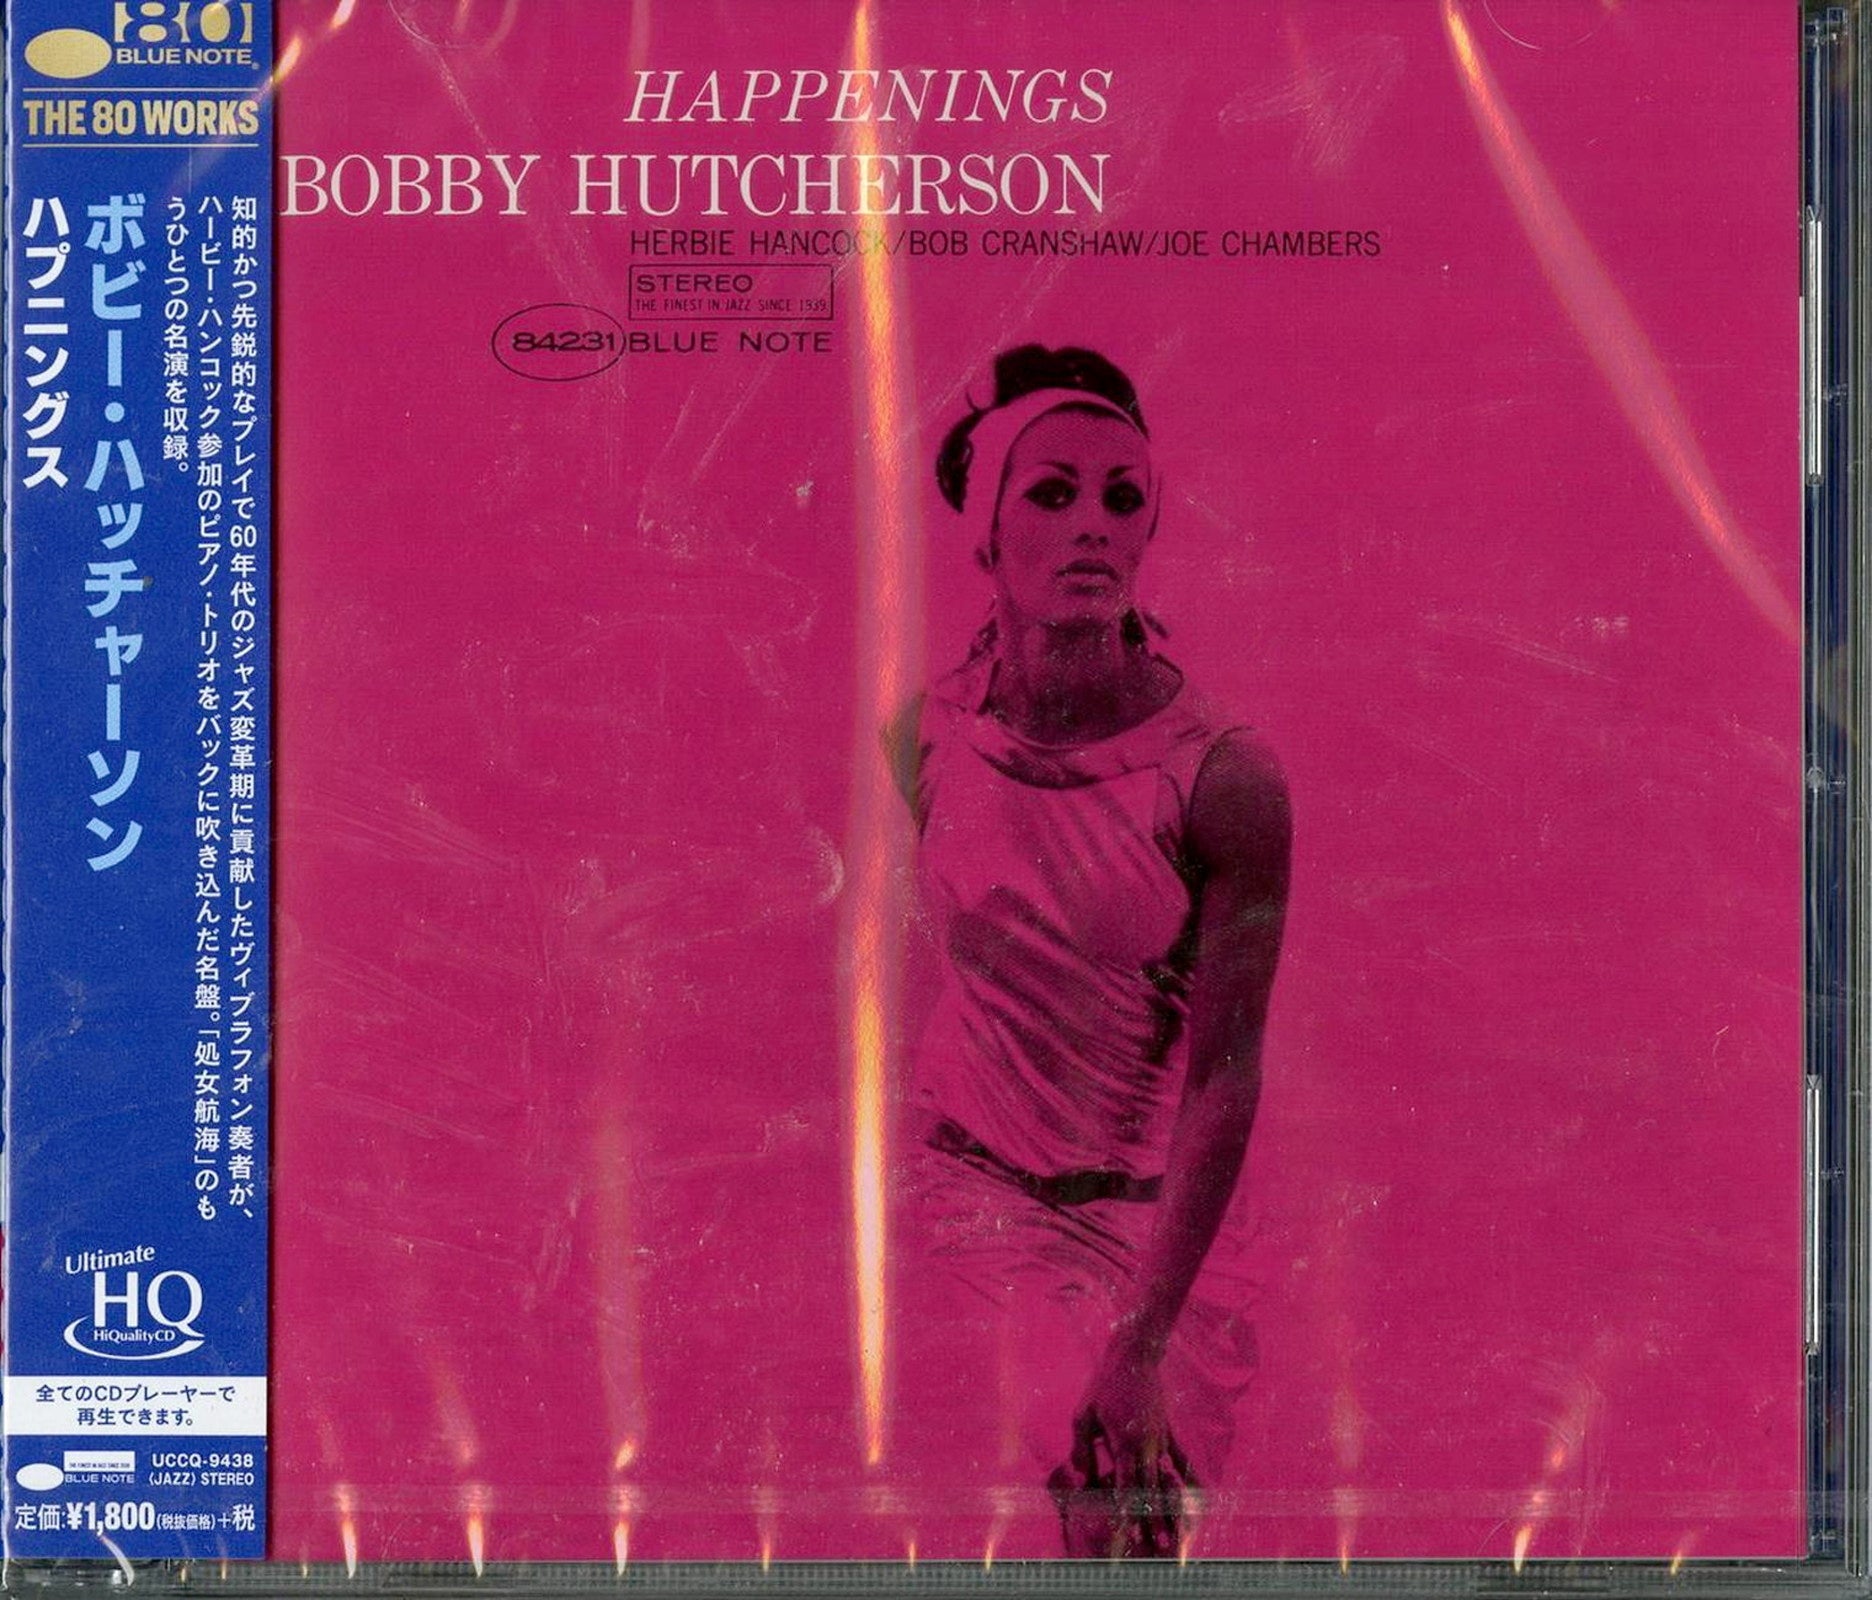 Bobby Hutcherson - Happenings - Japan UHQCD Limited Edition – CDs